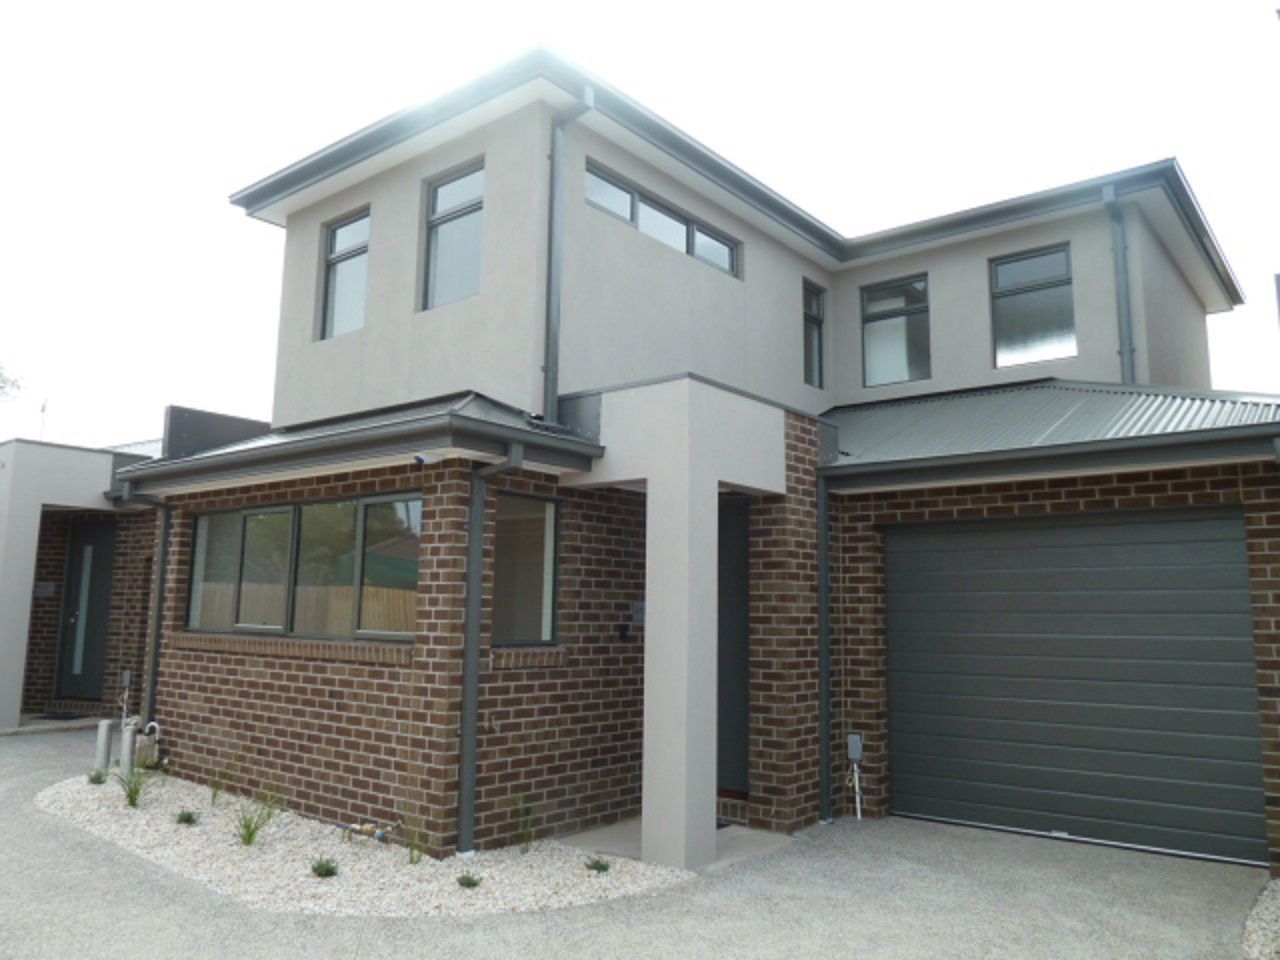 2 bedrooms Townhouse in 3/15 Cresswold Avenue AVONDALE HEIGHTS VIC, 3034